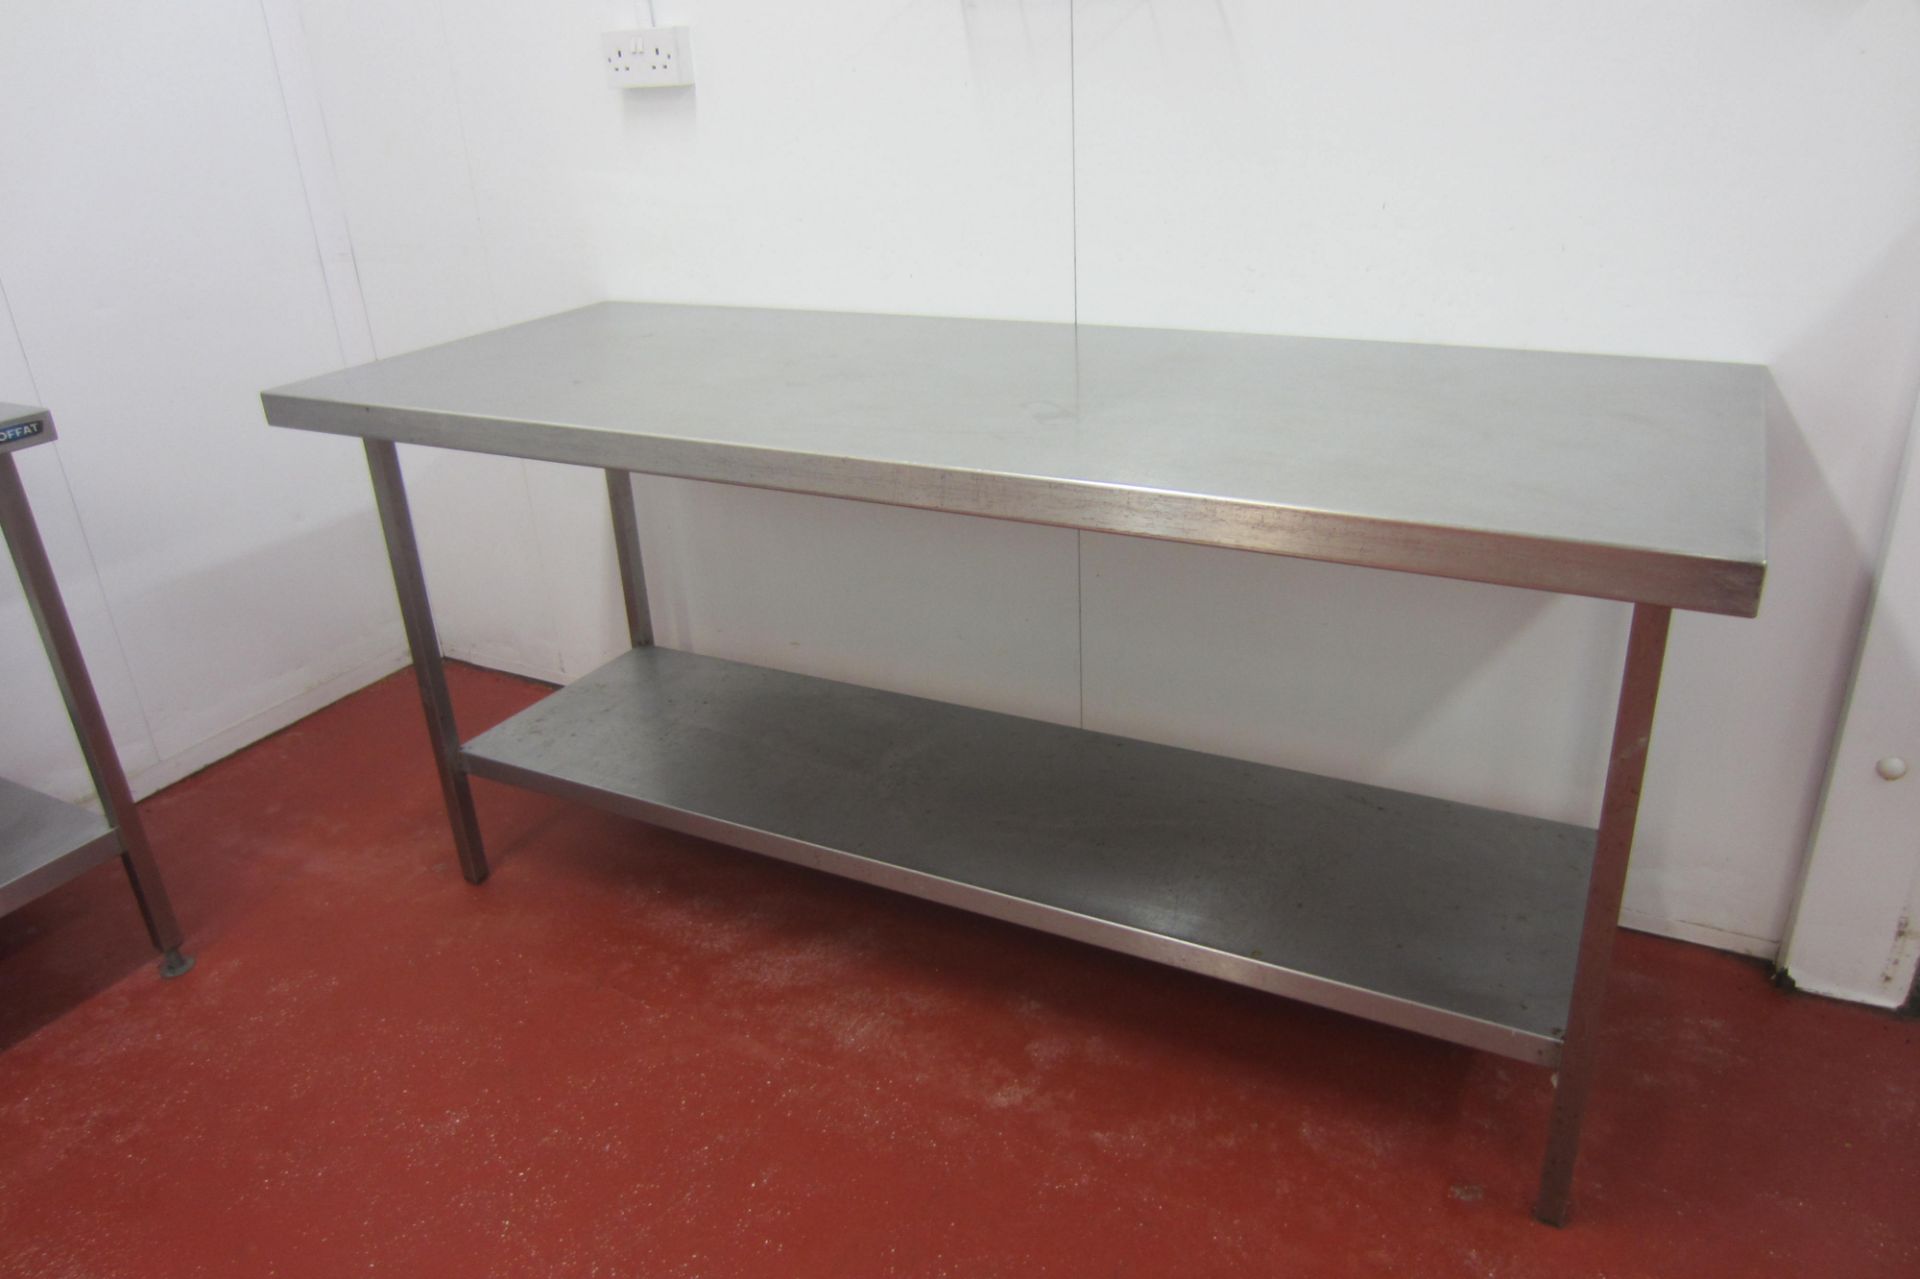 4 x Stainless Steel Prep/Work Tables with Shelves Under. Size 1 x 175cm x 70cm, 1 x 180cm x 70cm, - Image 2 of 6